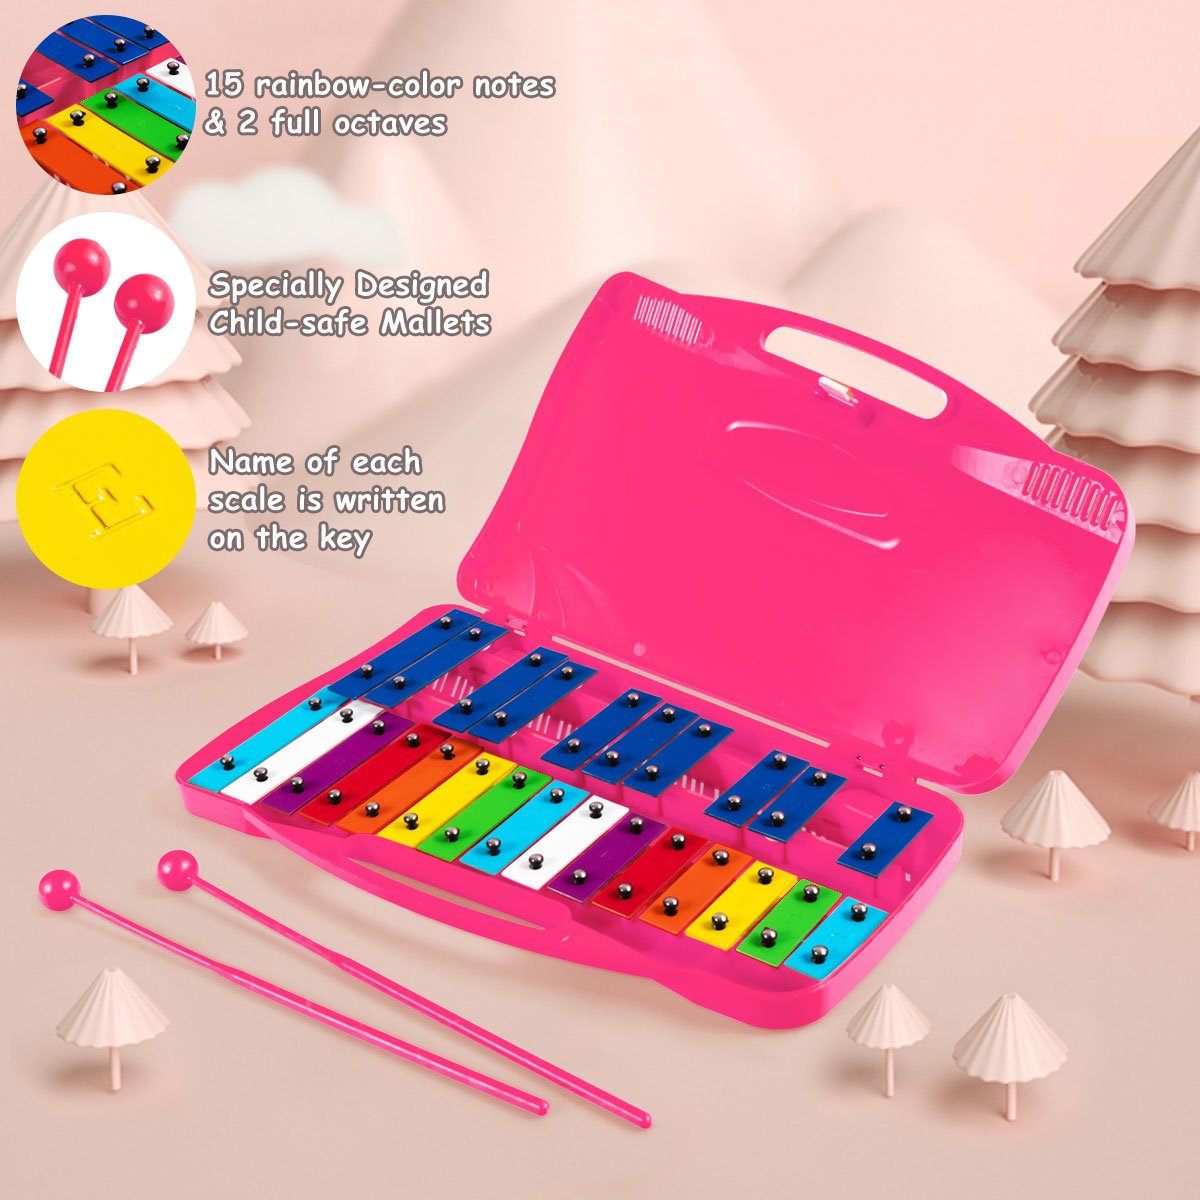 Enchanted Sounds: 25 Note Xylophone with Suitcase for Kids Pink